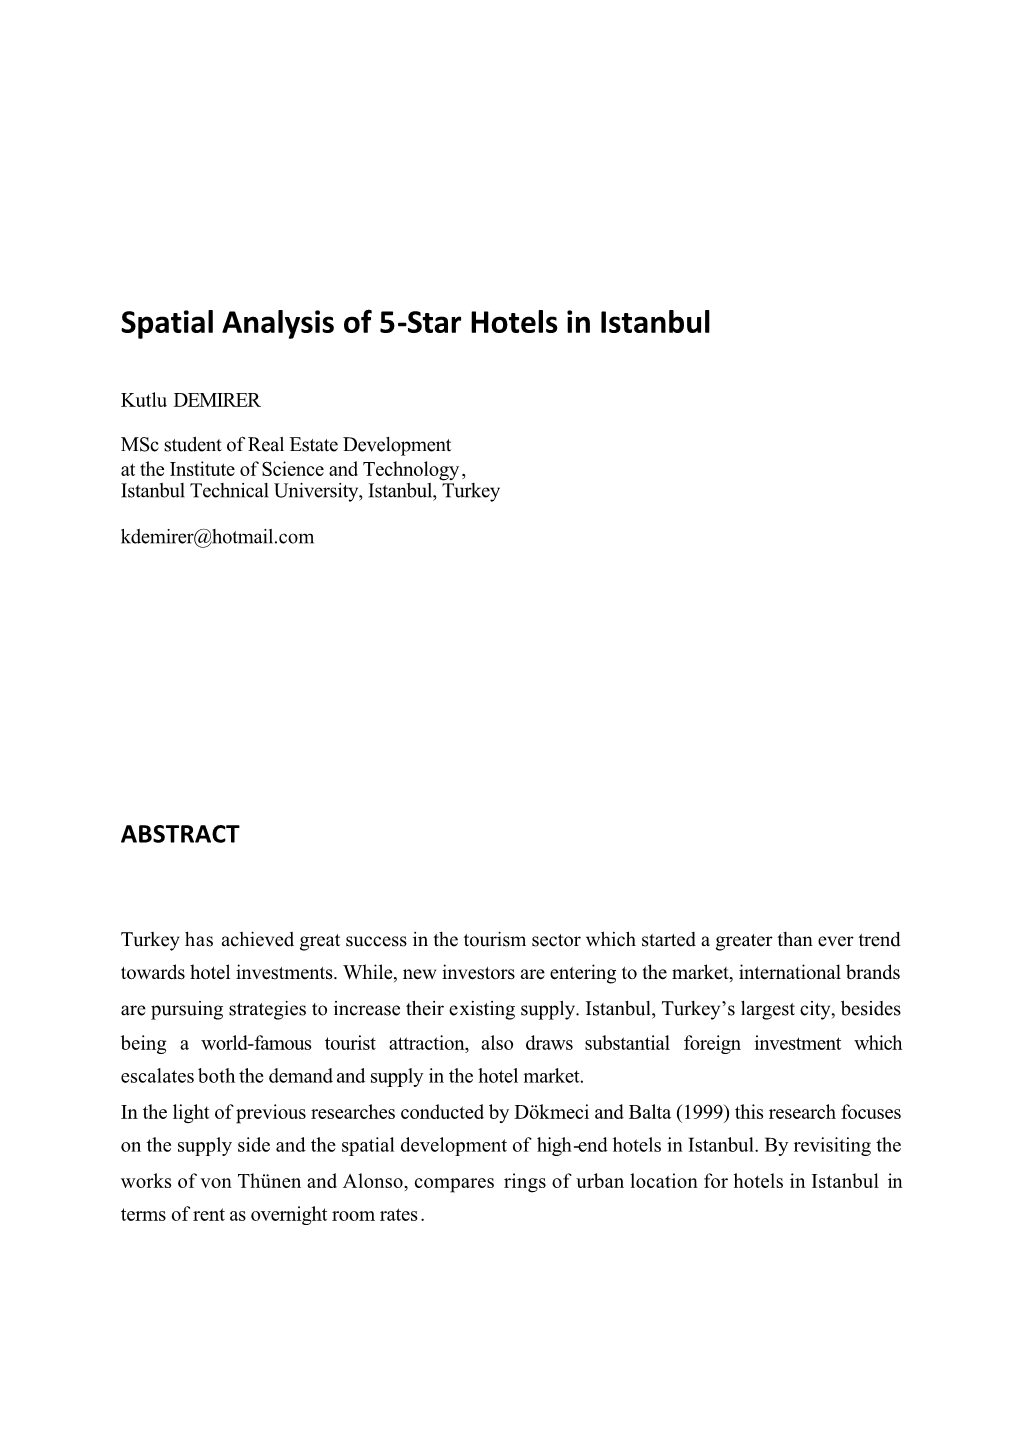 Spatial Analysis of 5-Star Hotels in Istanbul